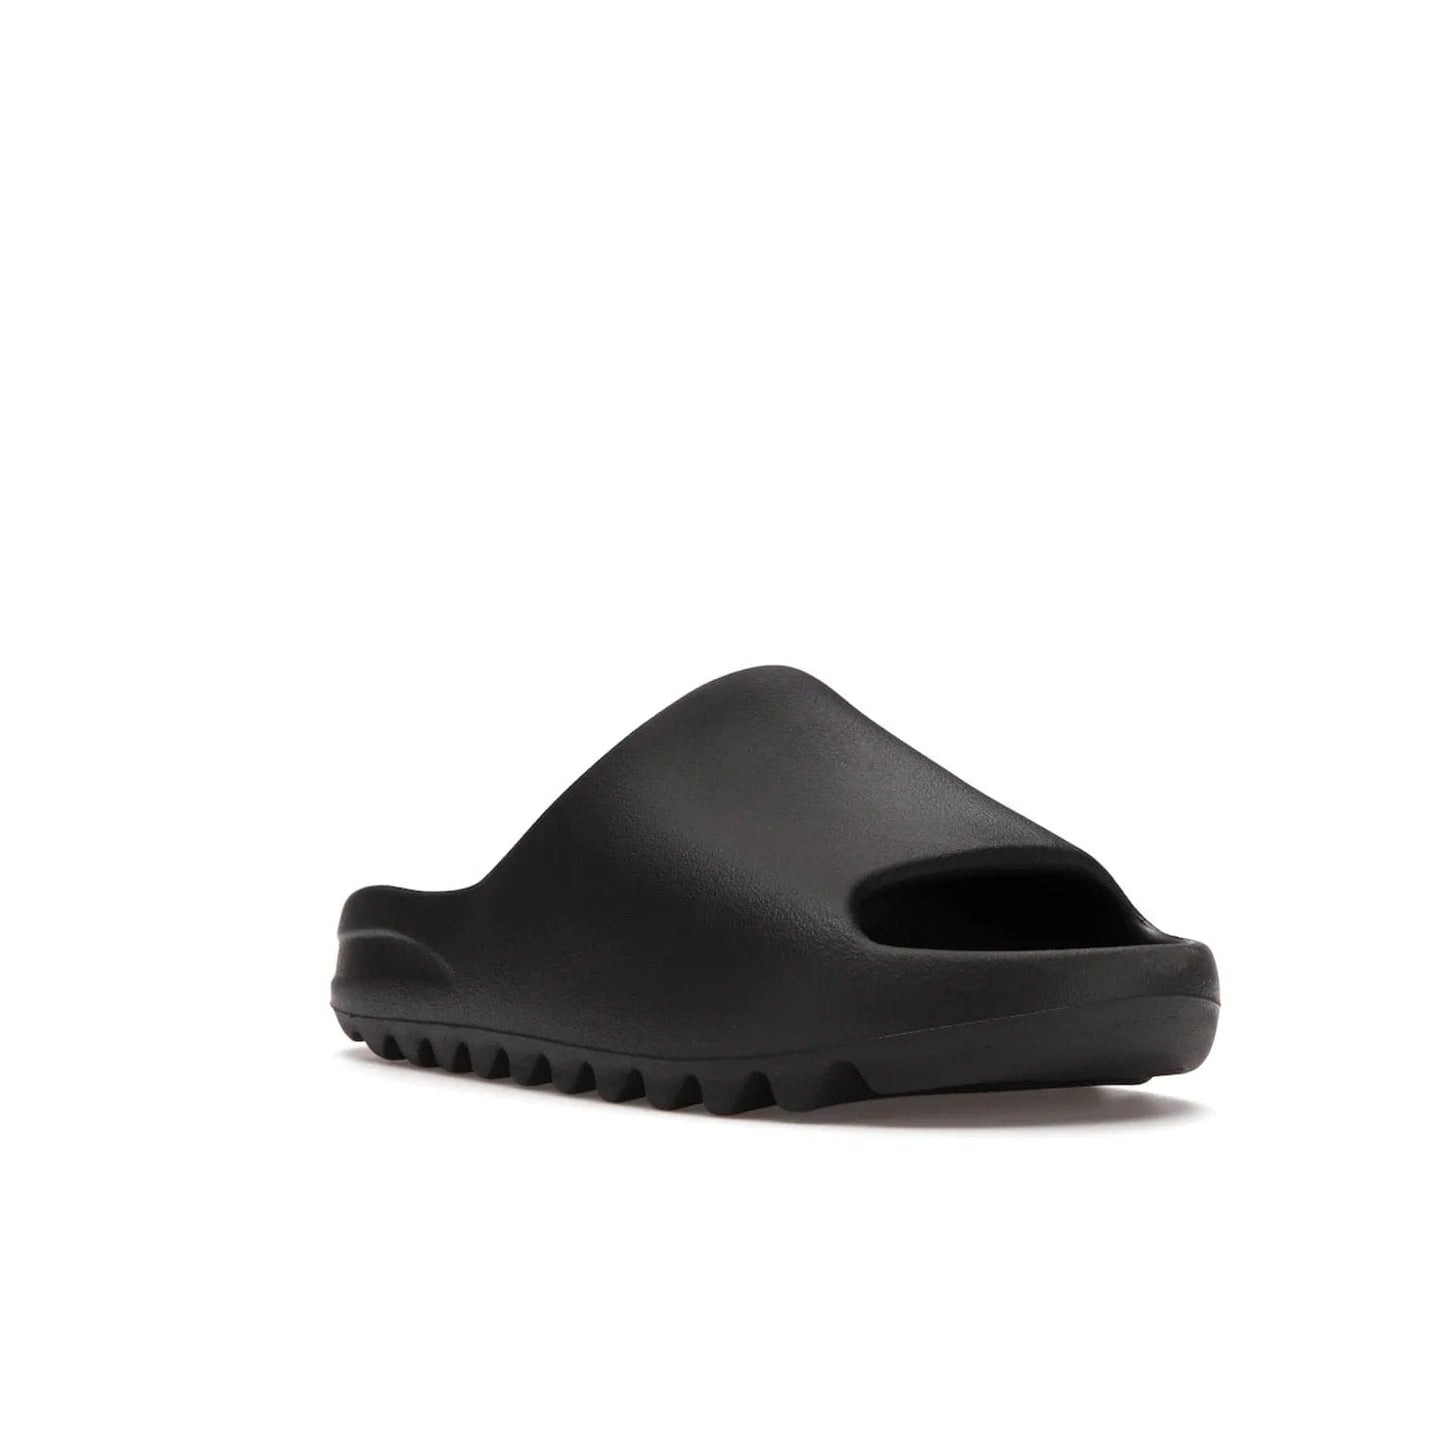 adidas Yeezy Slide Onyx - Image 6 - Only at www.BallersClubKickz.com - Step into comfort and style with the adidas Yeezy Slide Onyx. Featuring foam construction, an all-black colorway and a grooved outsole for stability and responsiveness, this versatile slide is a must-have for your collection.